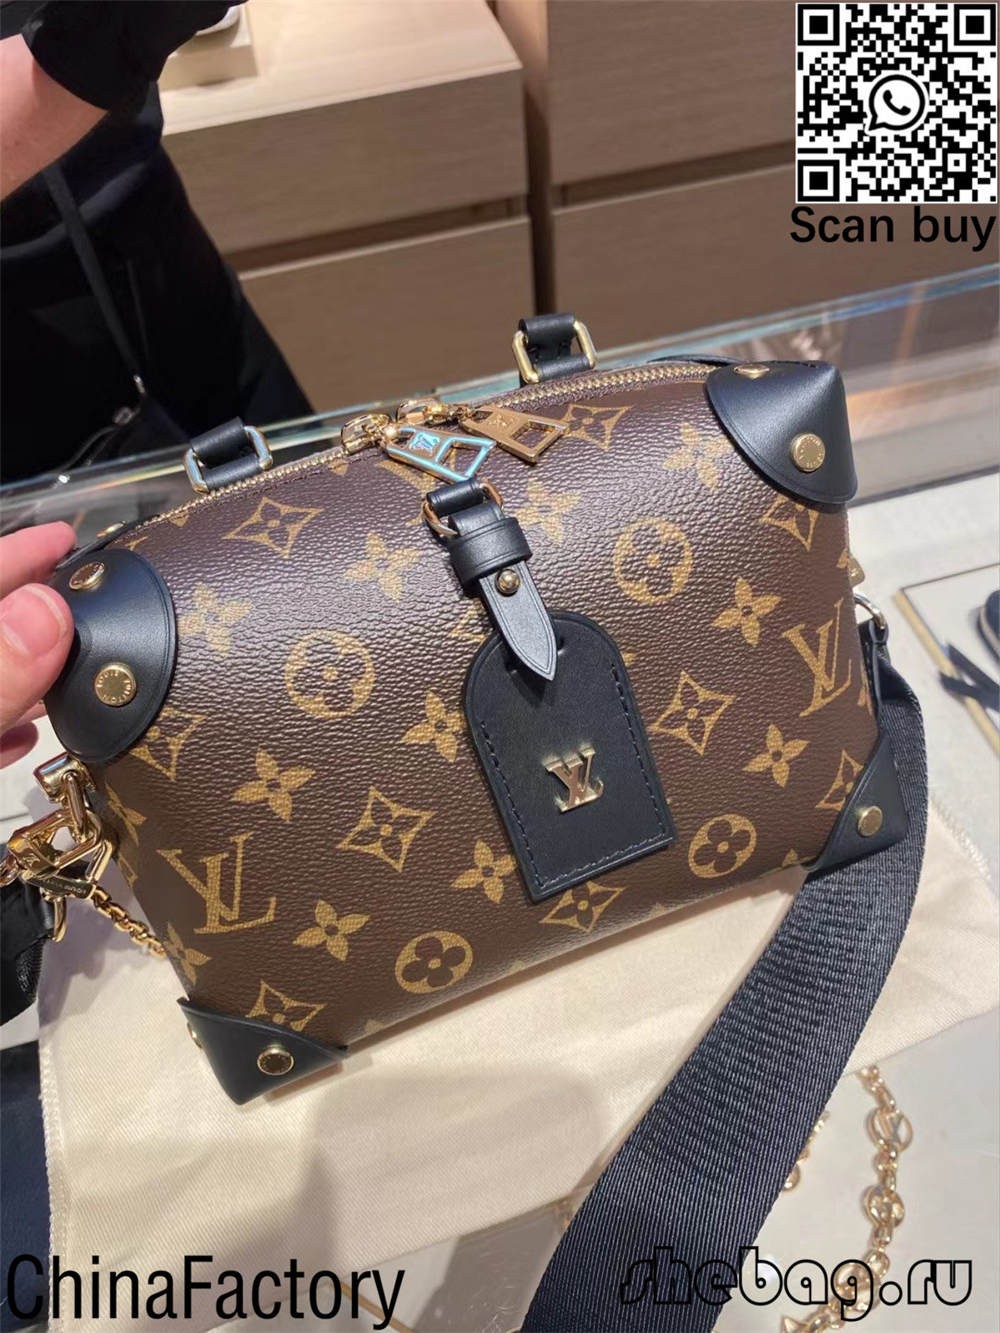 12 tips to teach you How to buy replica designer bags (2022 updated)-Best Quality Fake Louis Vuitton Bag Online Store, Replica designer bag ru